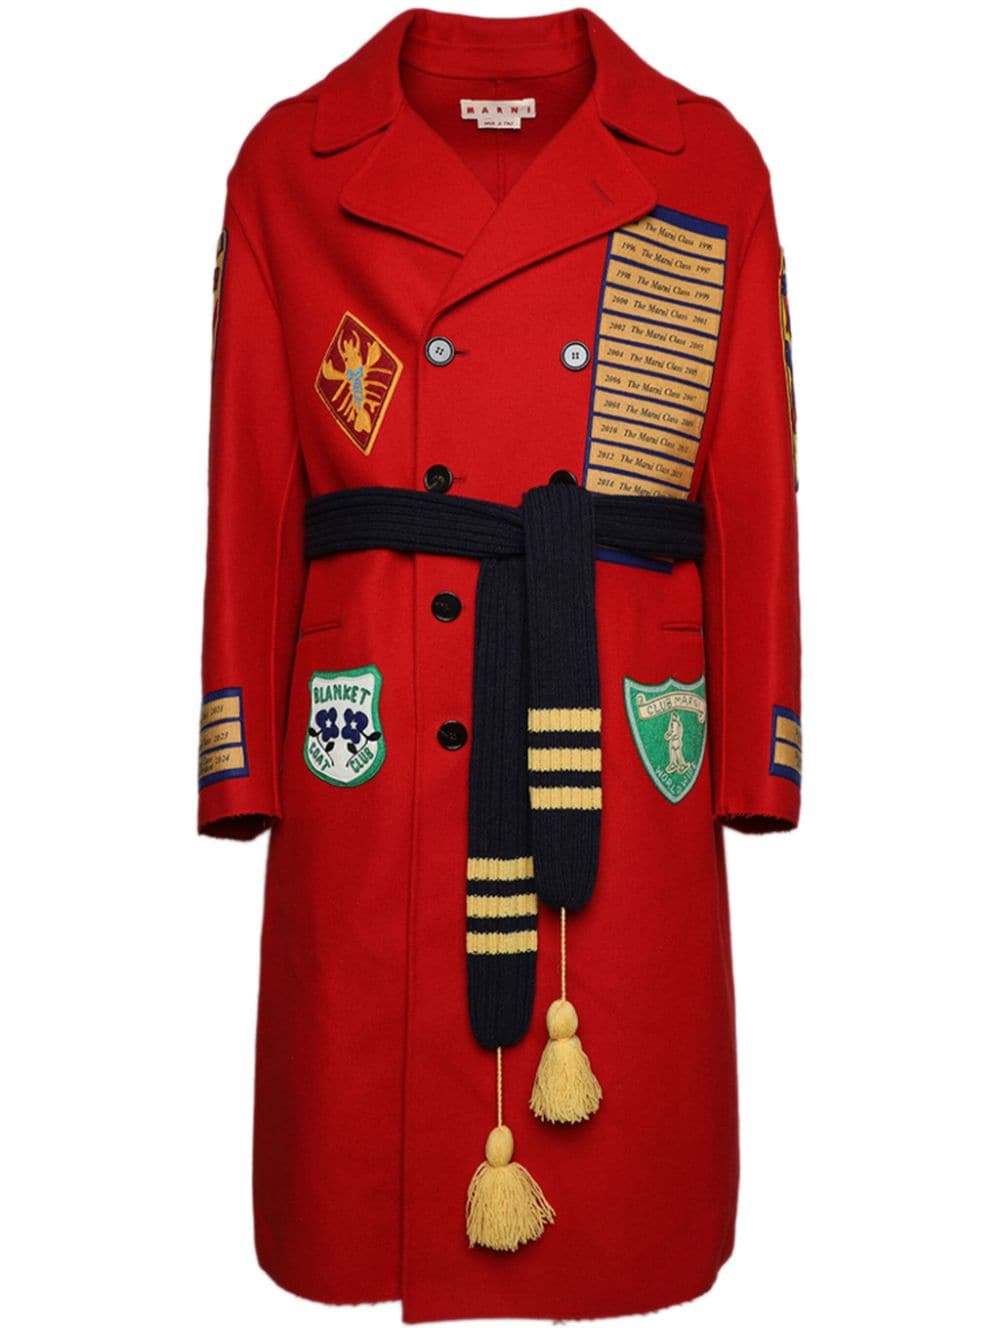 Marni double-breasted wool coat - Red von Marni